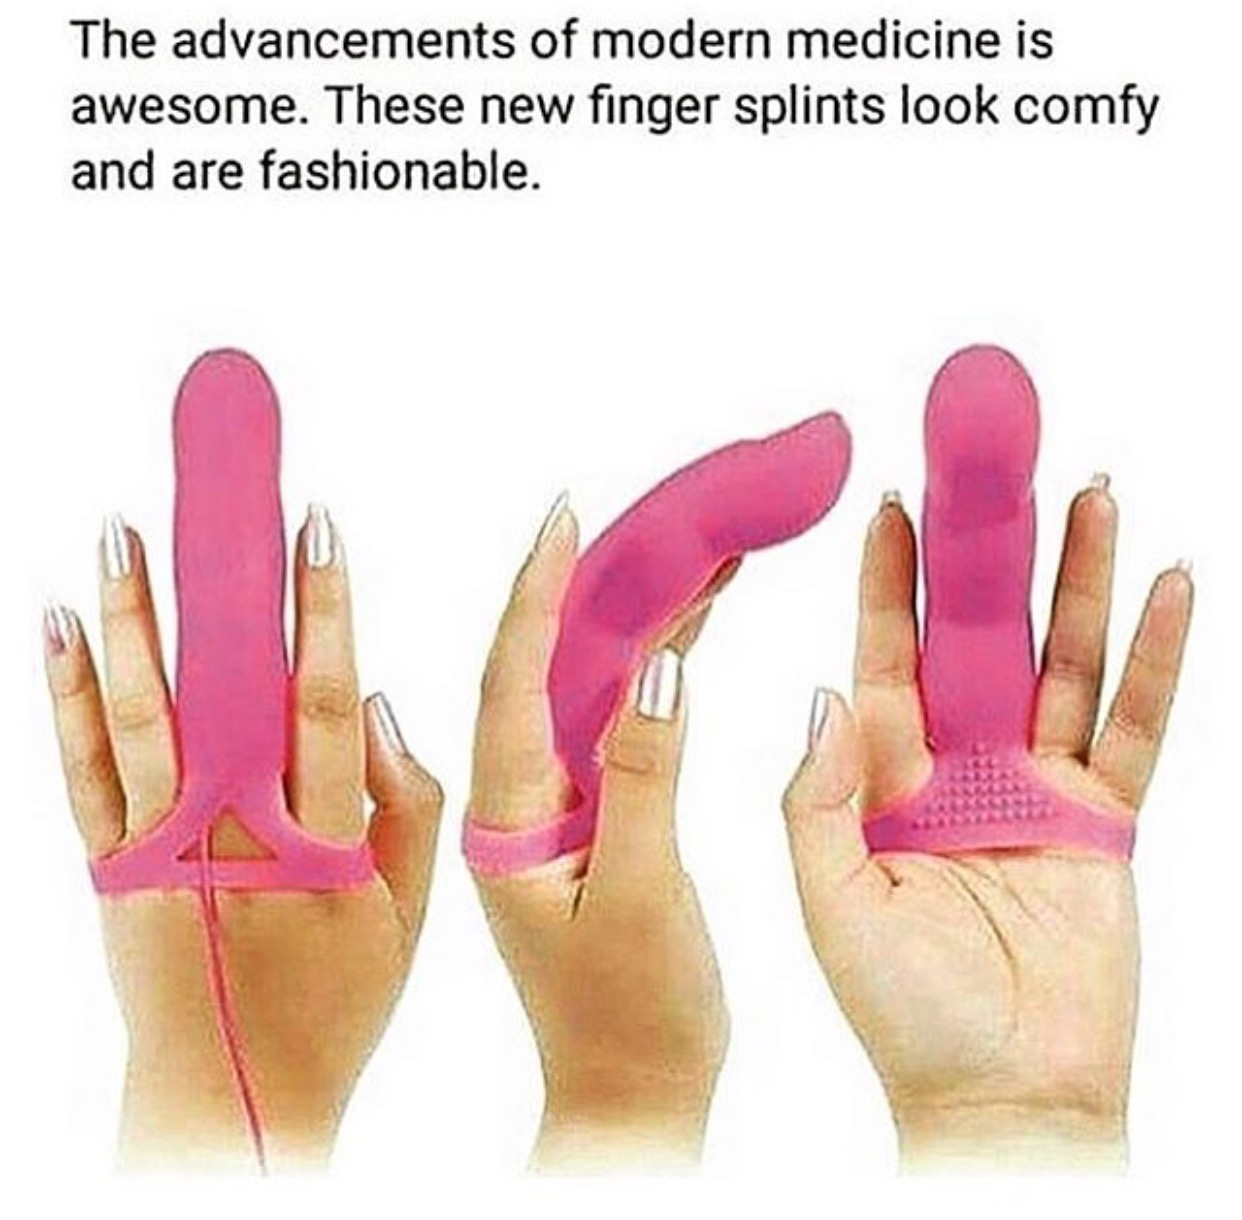 finger splint meme - The advancements of modern medicine is awesome. These new finger splints look comfy and are fashionable.